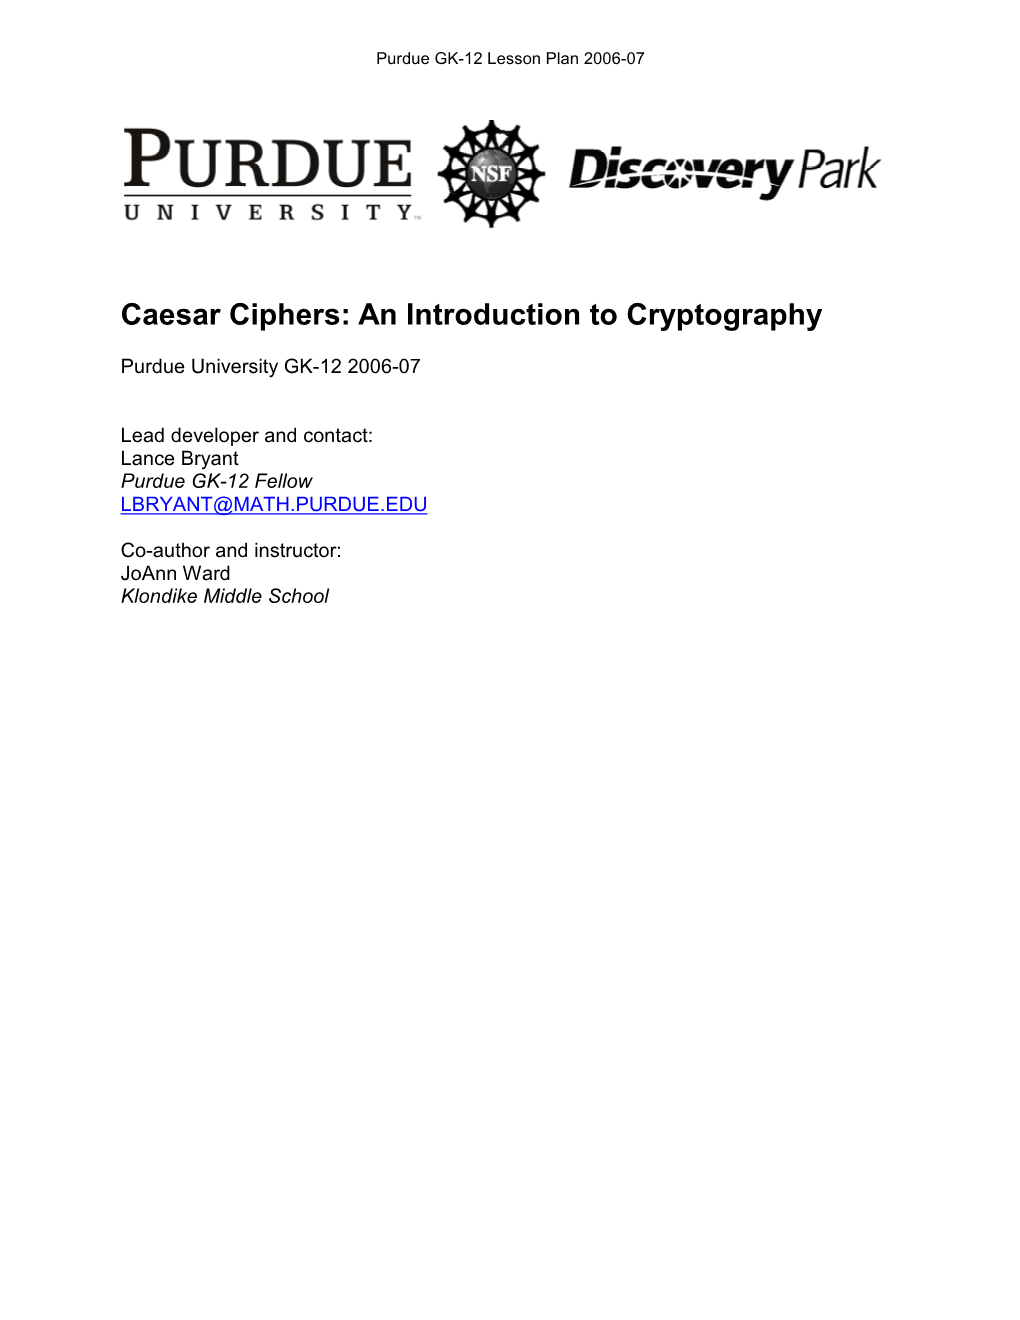 Caesar Ciphers: an Introduction to Cryptography